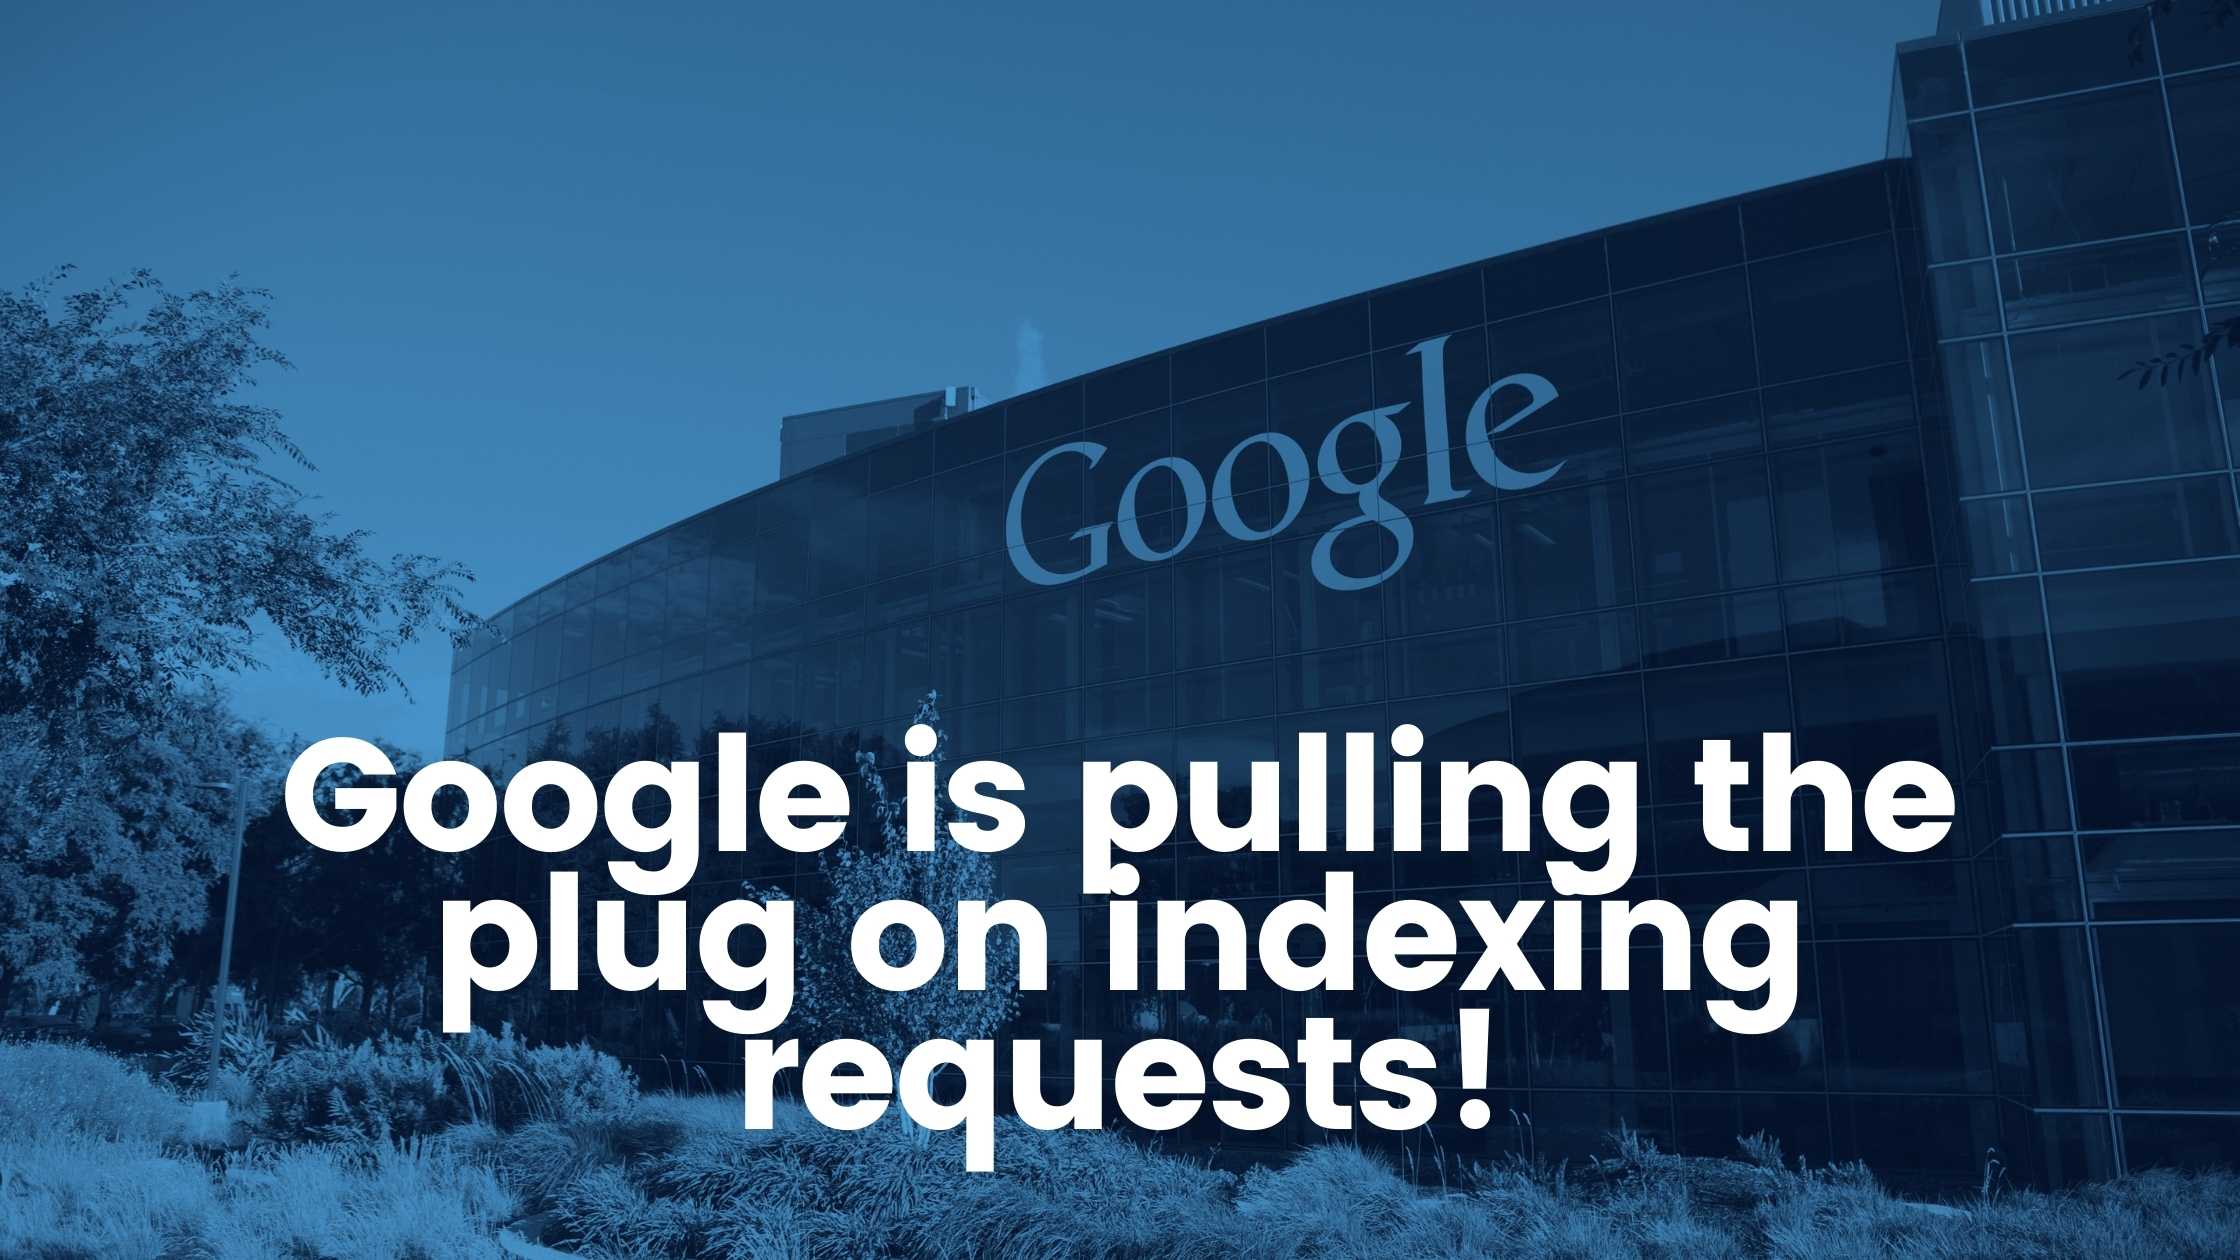 indexing requests,request indexing,indexing requests are currently suspended